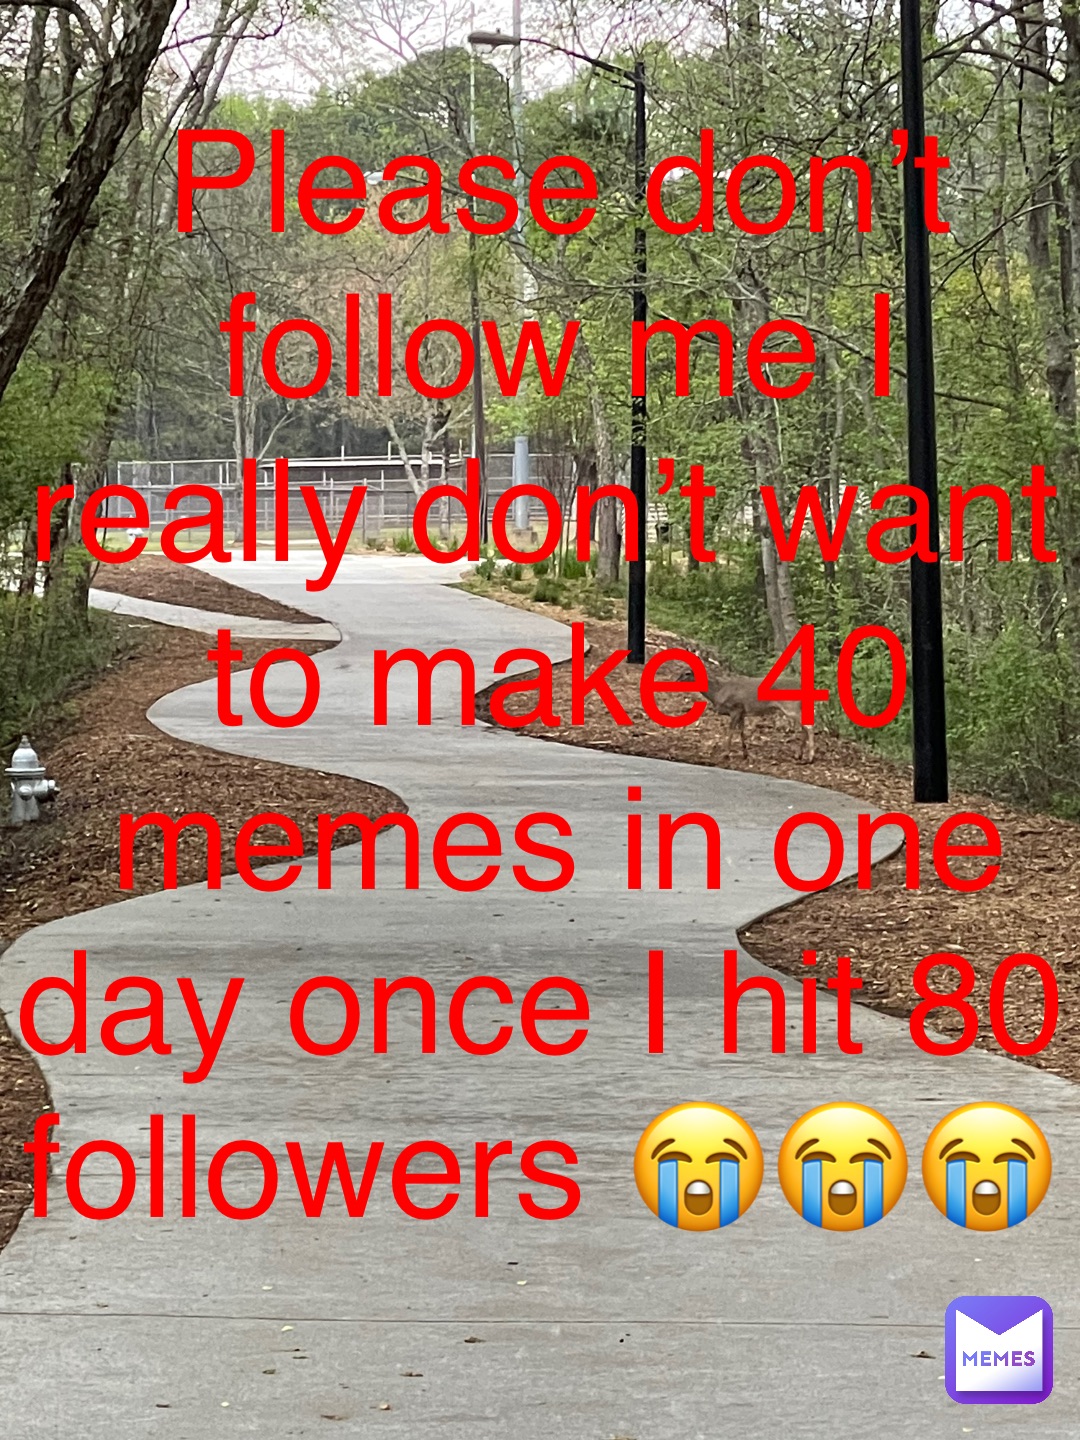 Please don’t follow me I really don’t want to make 40 memes in one day once I hit 80 followers 😭😭😭